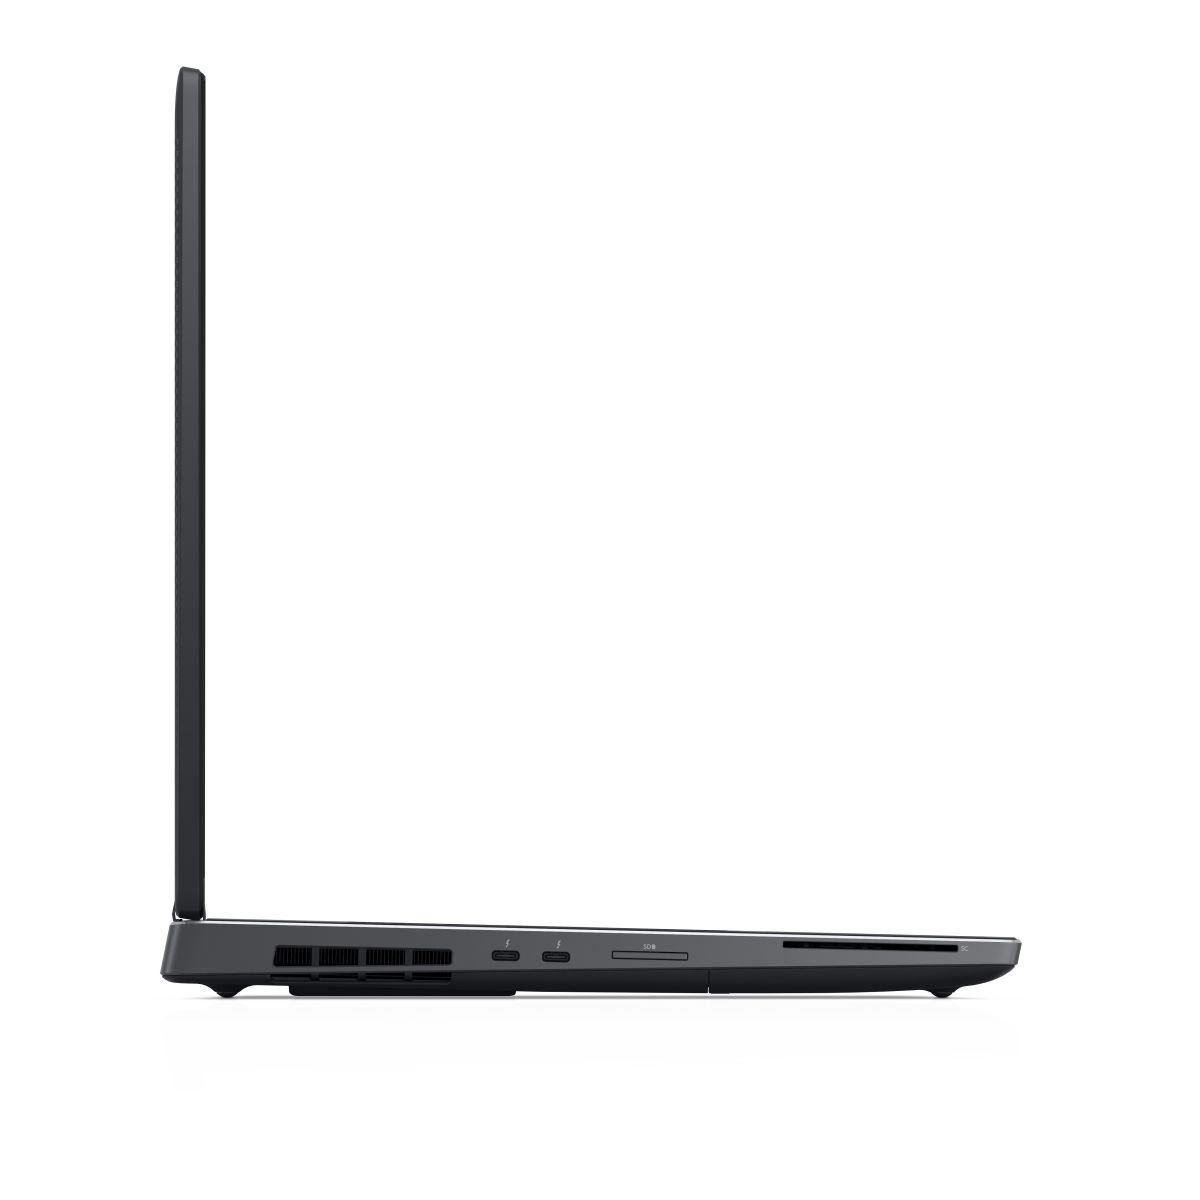 DELL Precision 7730 - RF1CP laptop specifications